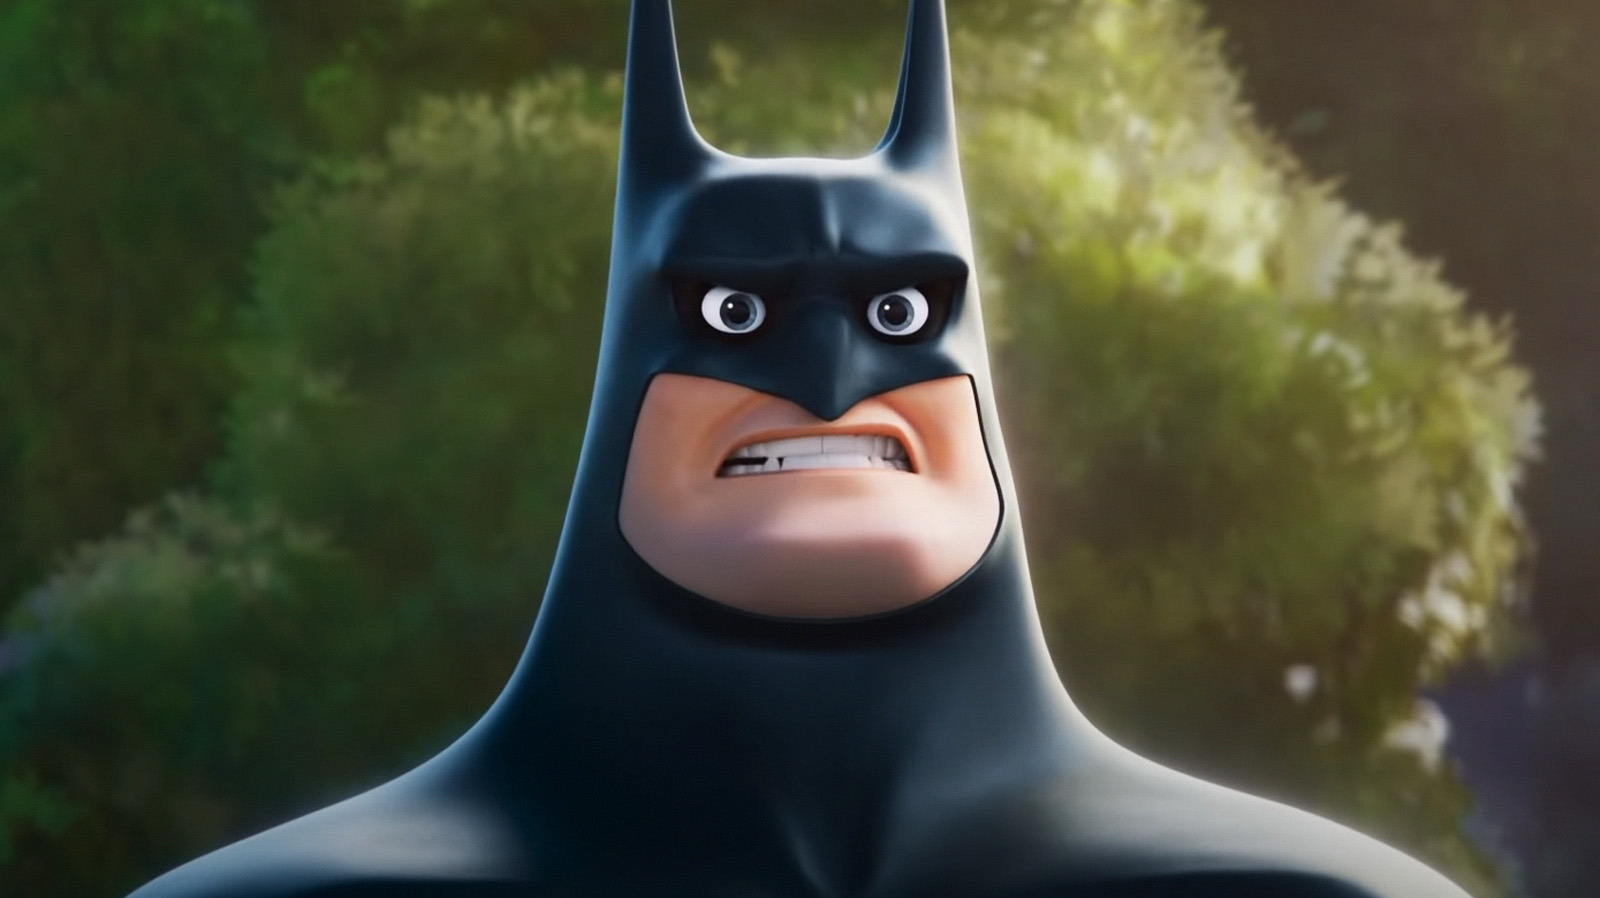 Keanu Reeves Is The Voice Of Batman In New DC League Of Super-Pets Trailer